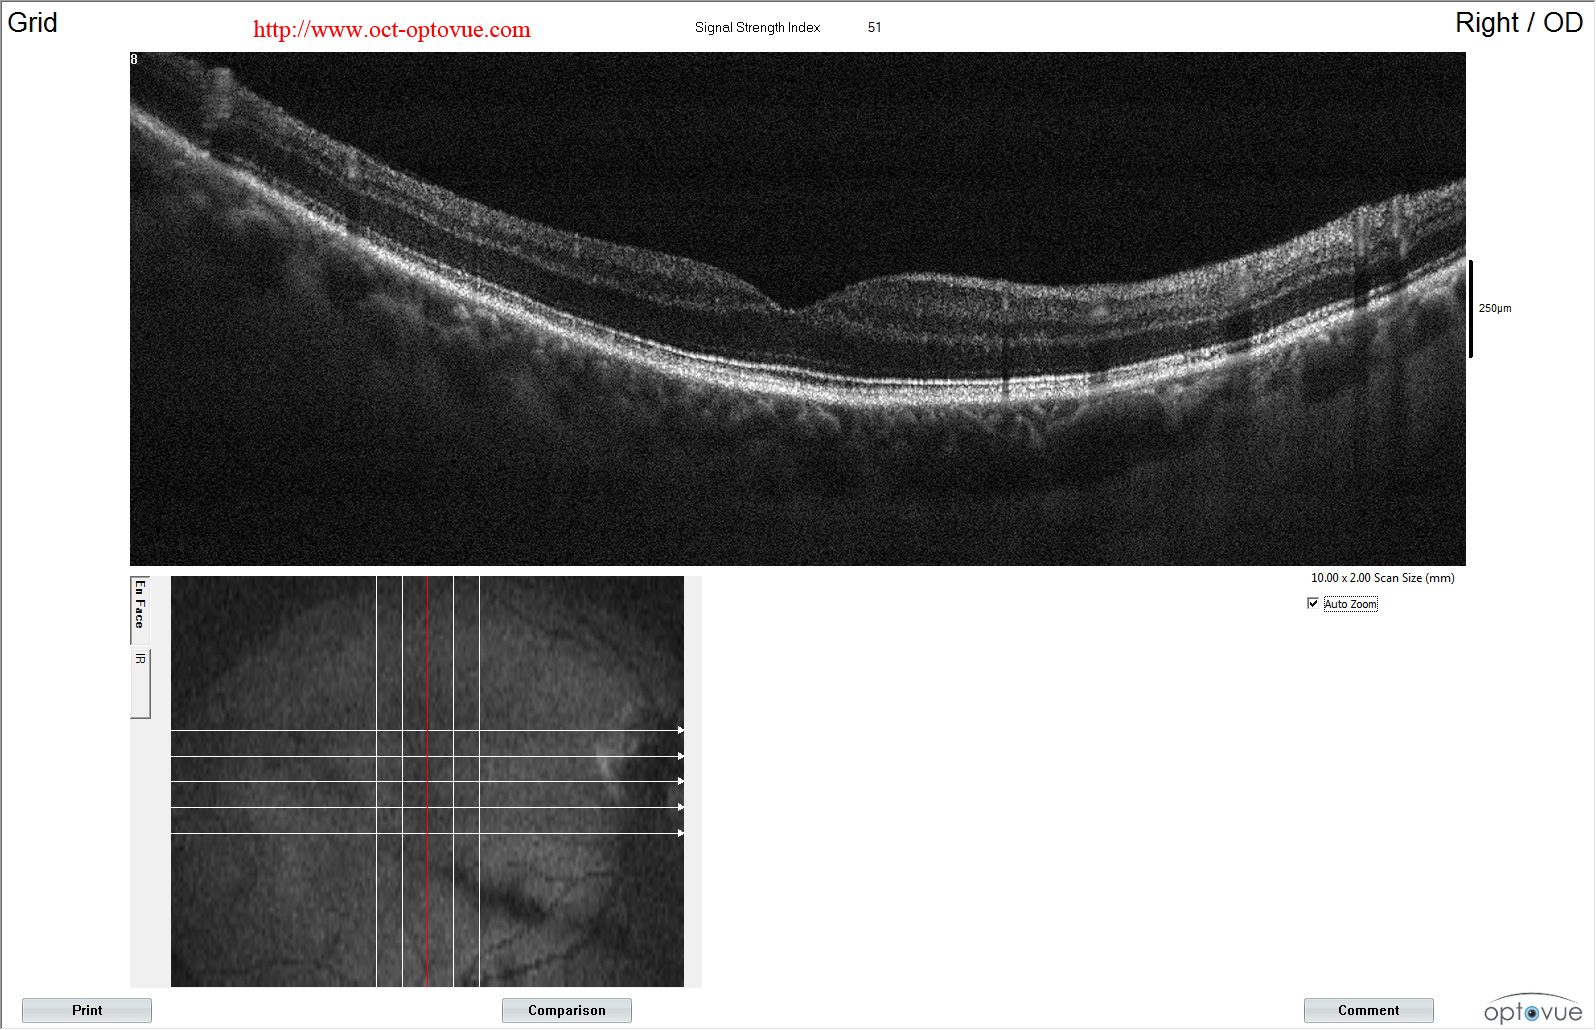 AION NOIAA OPTICAL COHERENCE TOMOGRAPHY